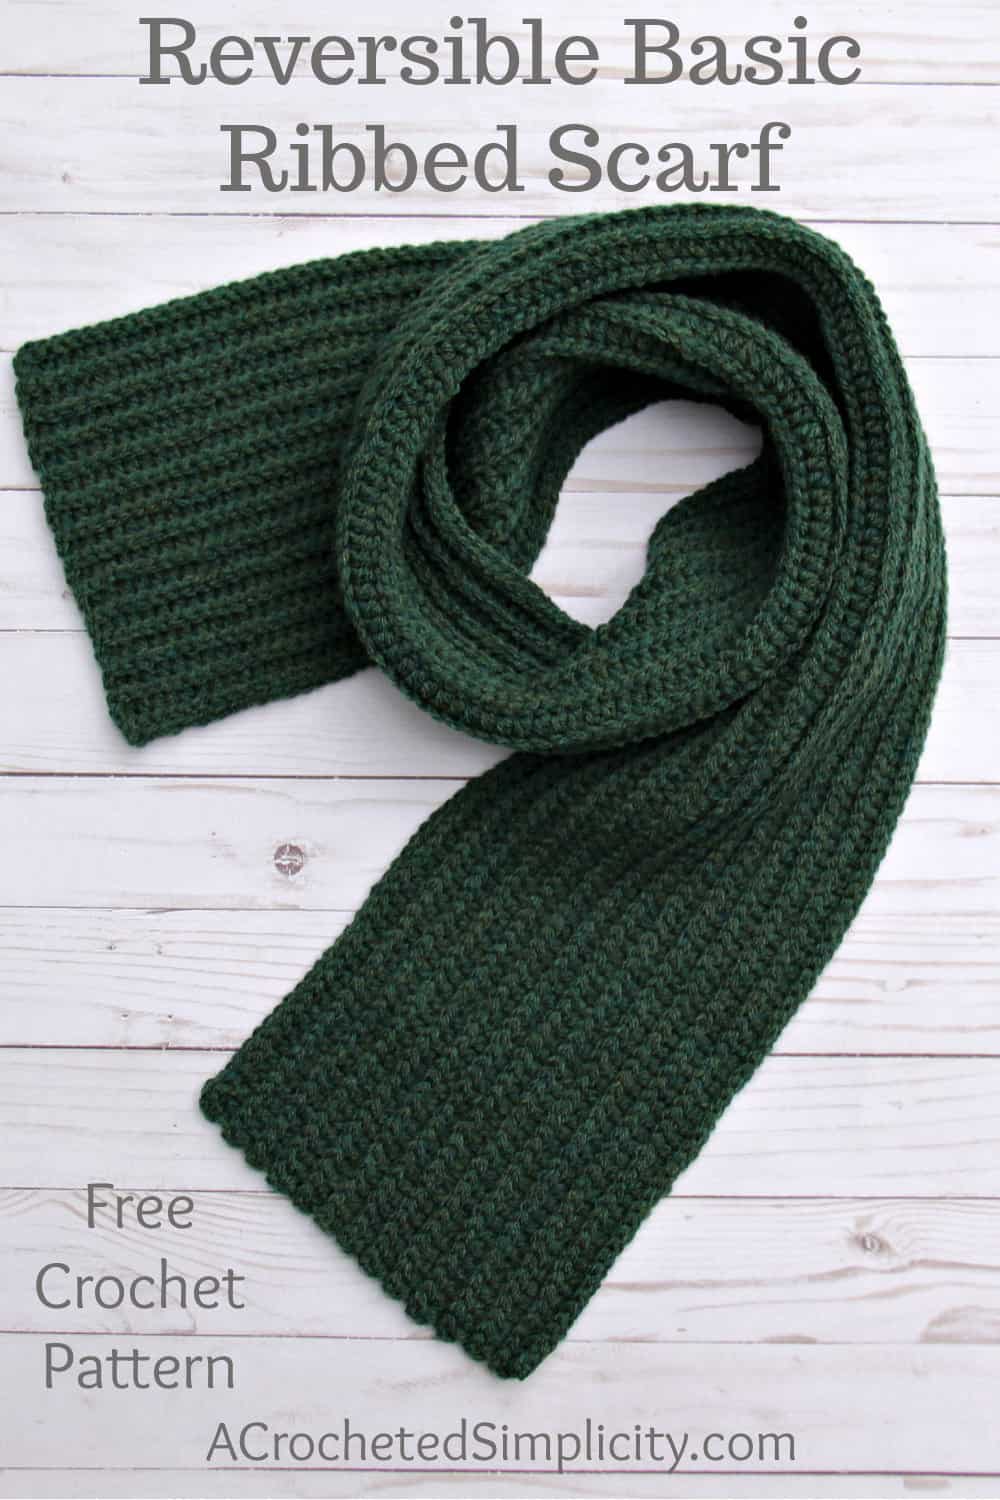 Reversible Basic Ribbed Scarf - Free Crochet Scarf Pattern - A